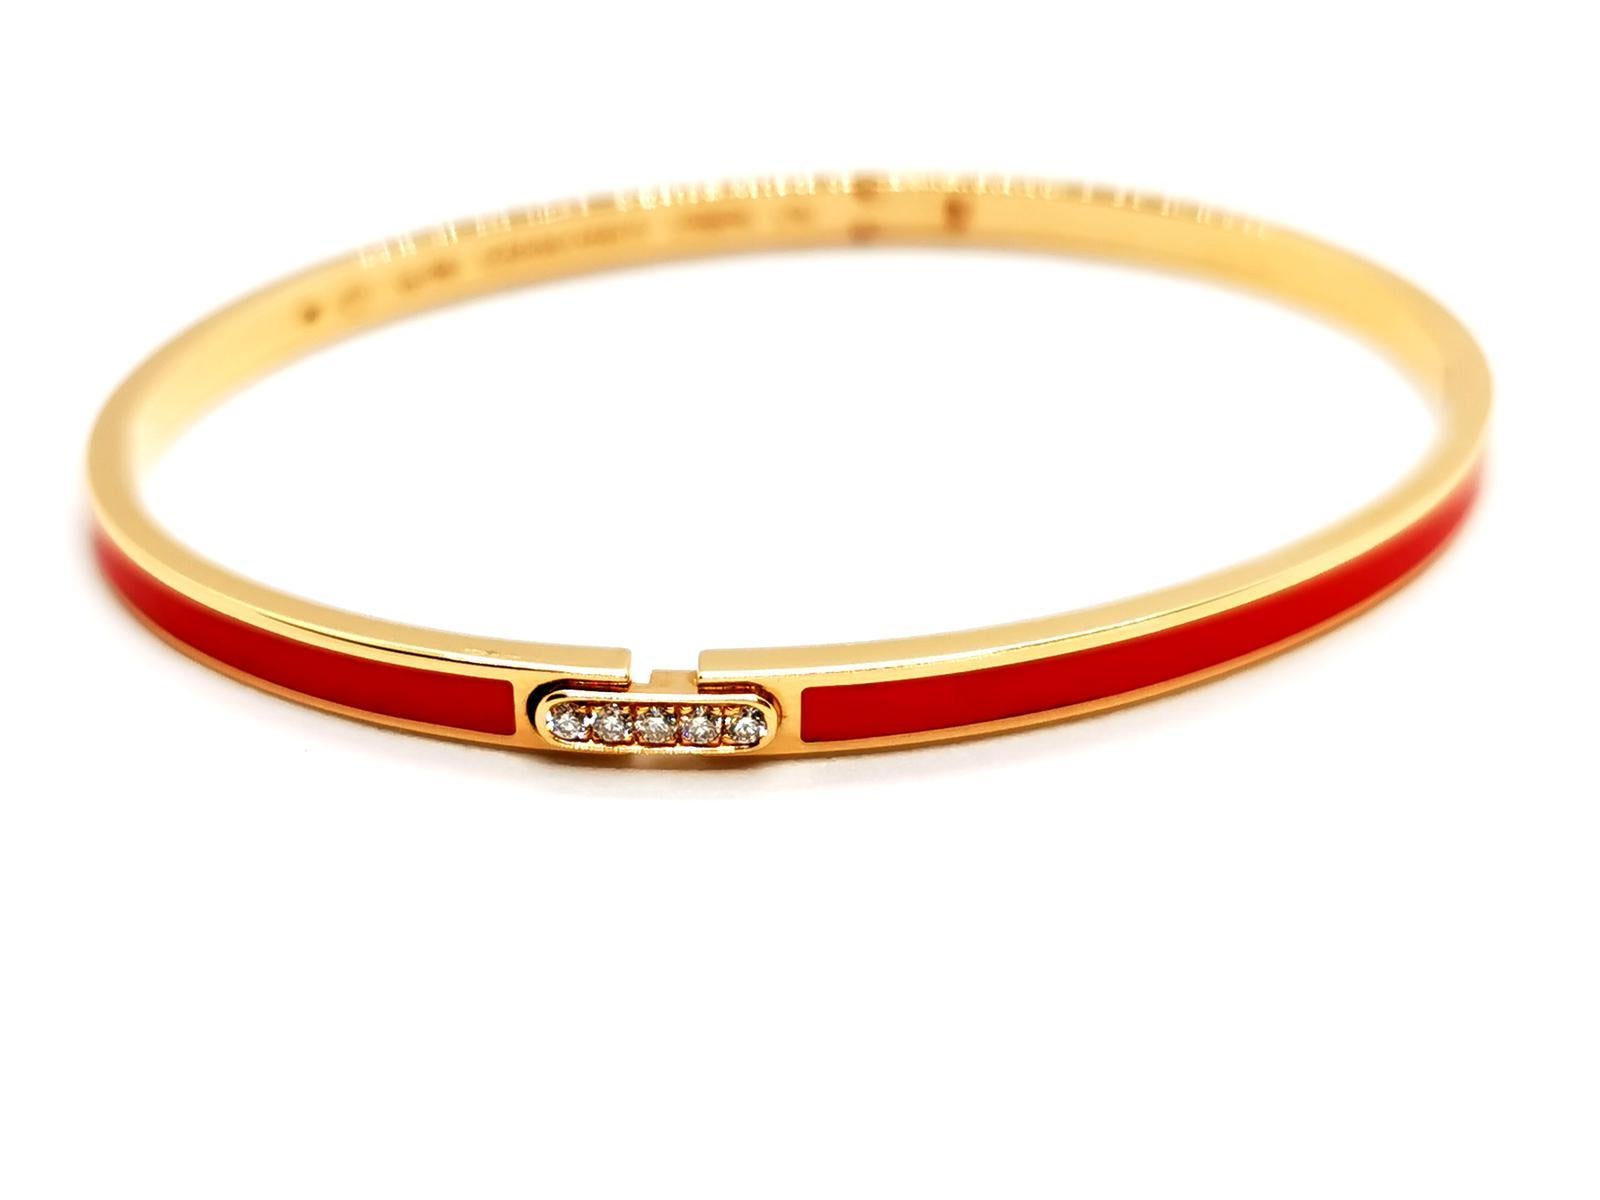 Bracelet signed by the house of Chaumet. Liens Evidence collection. in 750 thousandths pink gold (18 carats). and red lacquer. link set with 5 diamonds. brilliant cut. approximately 0.01 ct each. total diamond weight: approximately 0. 05 ct. oval